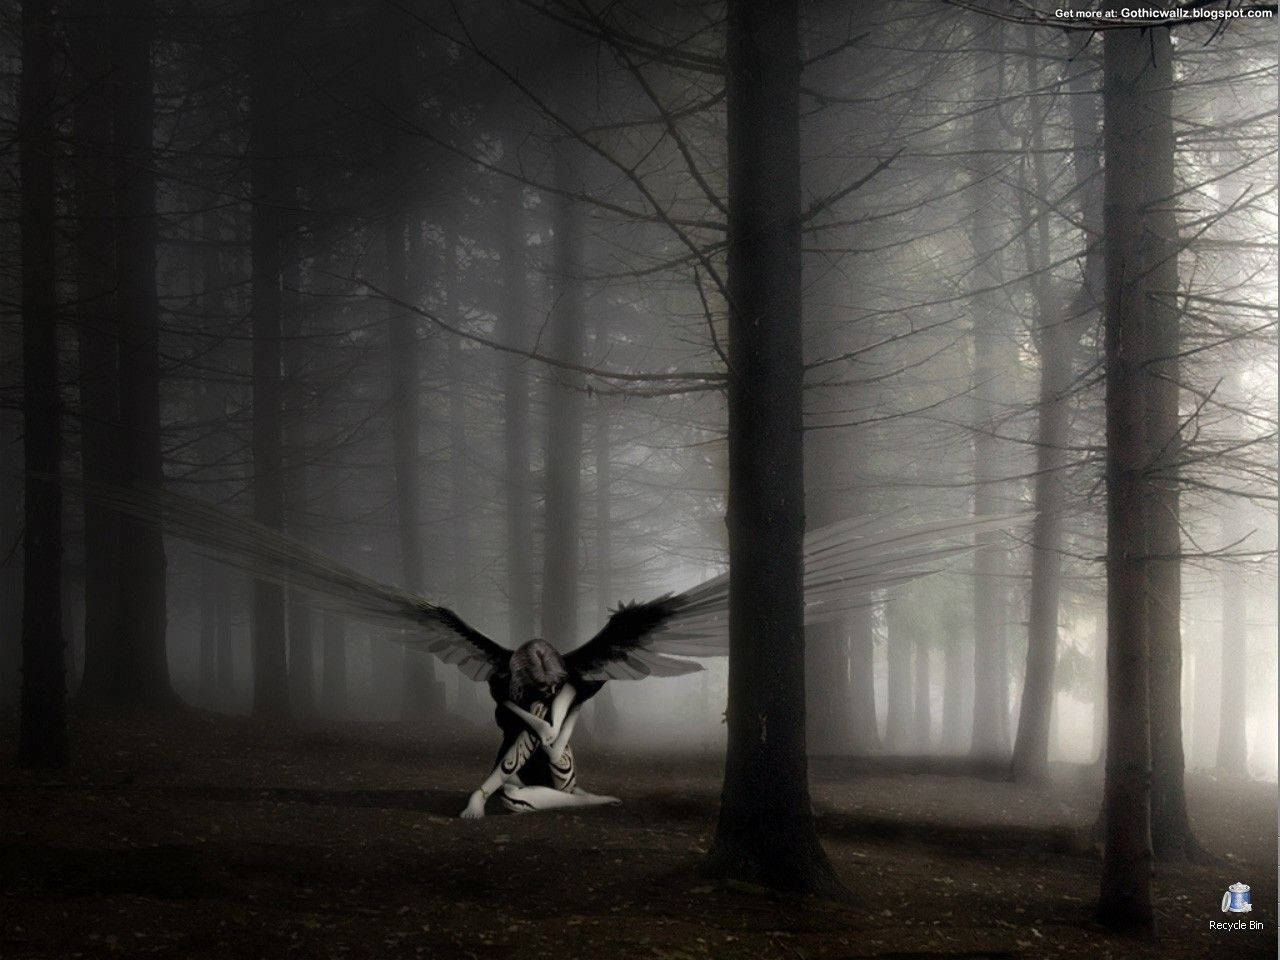 An angelic figure stands amongst the trees in a mysterious gothic forest. Wallpaper